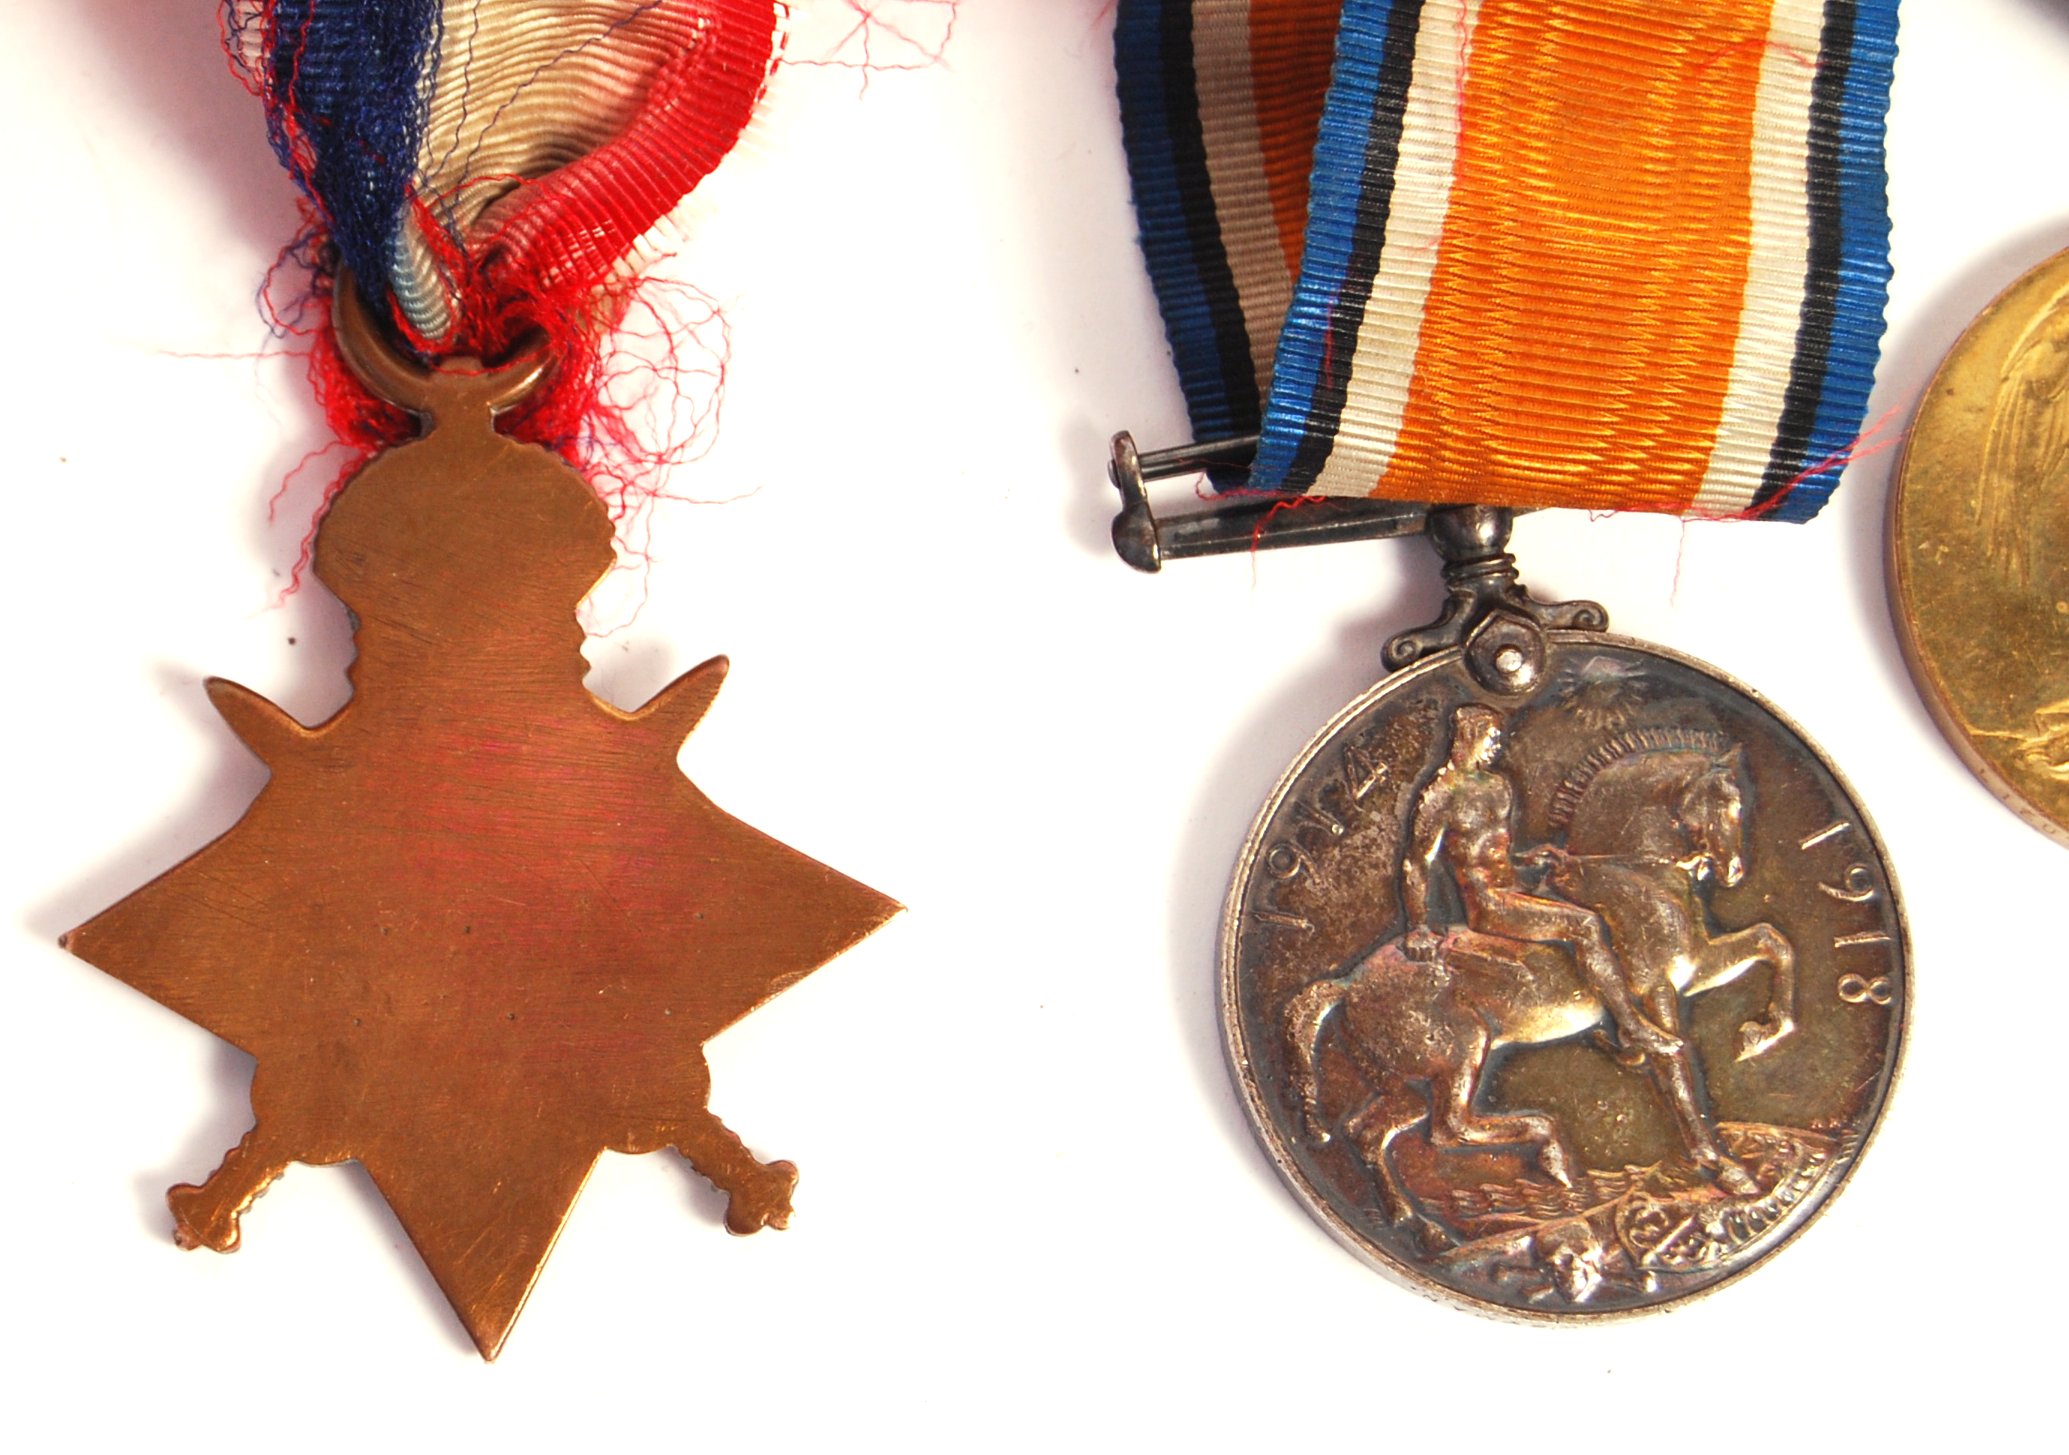 WWI FIRST WORLD WAR MEDAL GROUP - ORDER OF THE STAR OF ROMANIA - Image 8 of 8